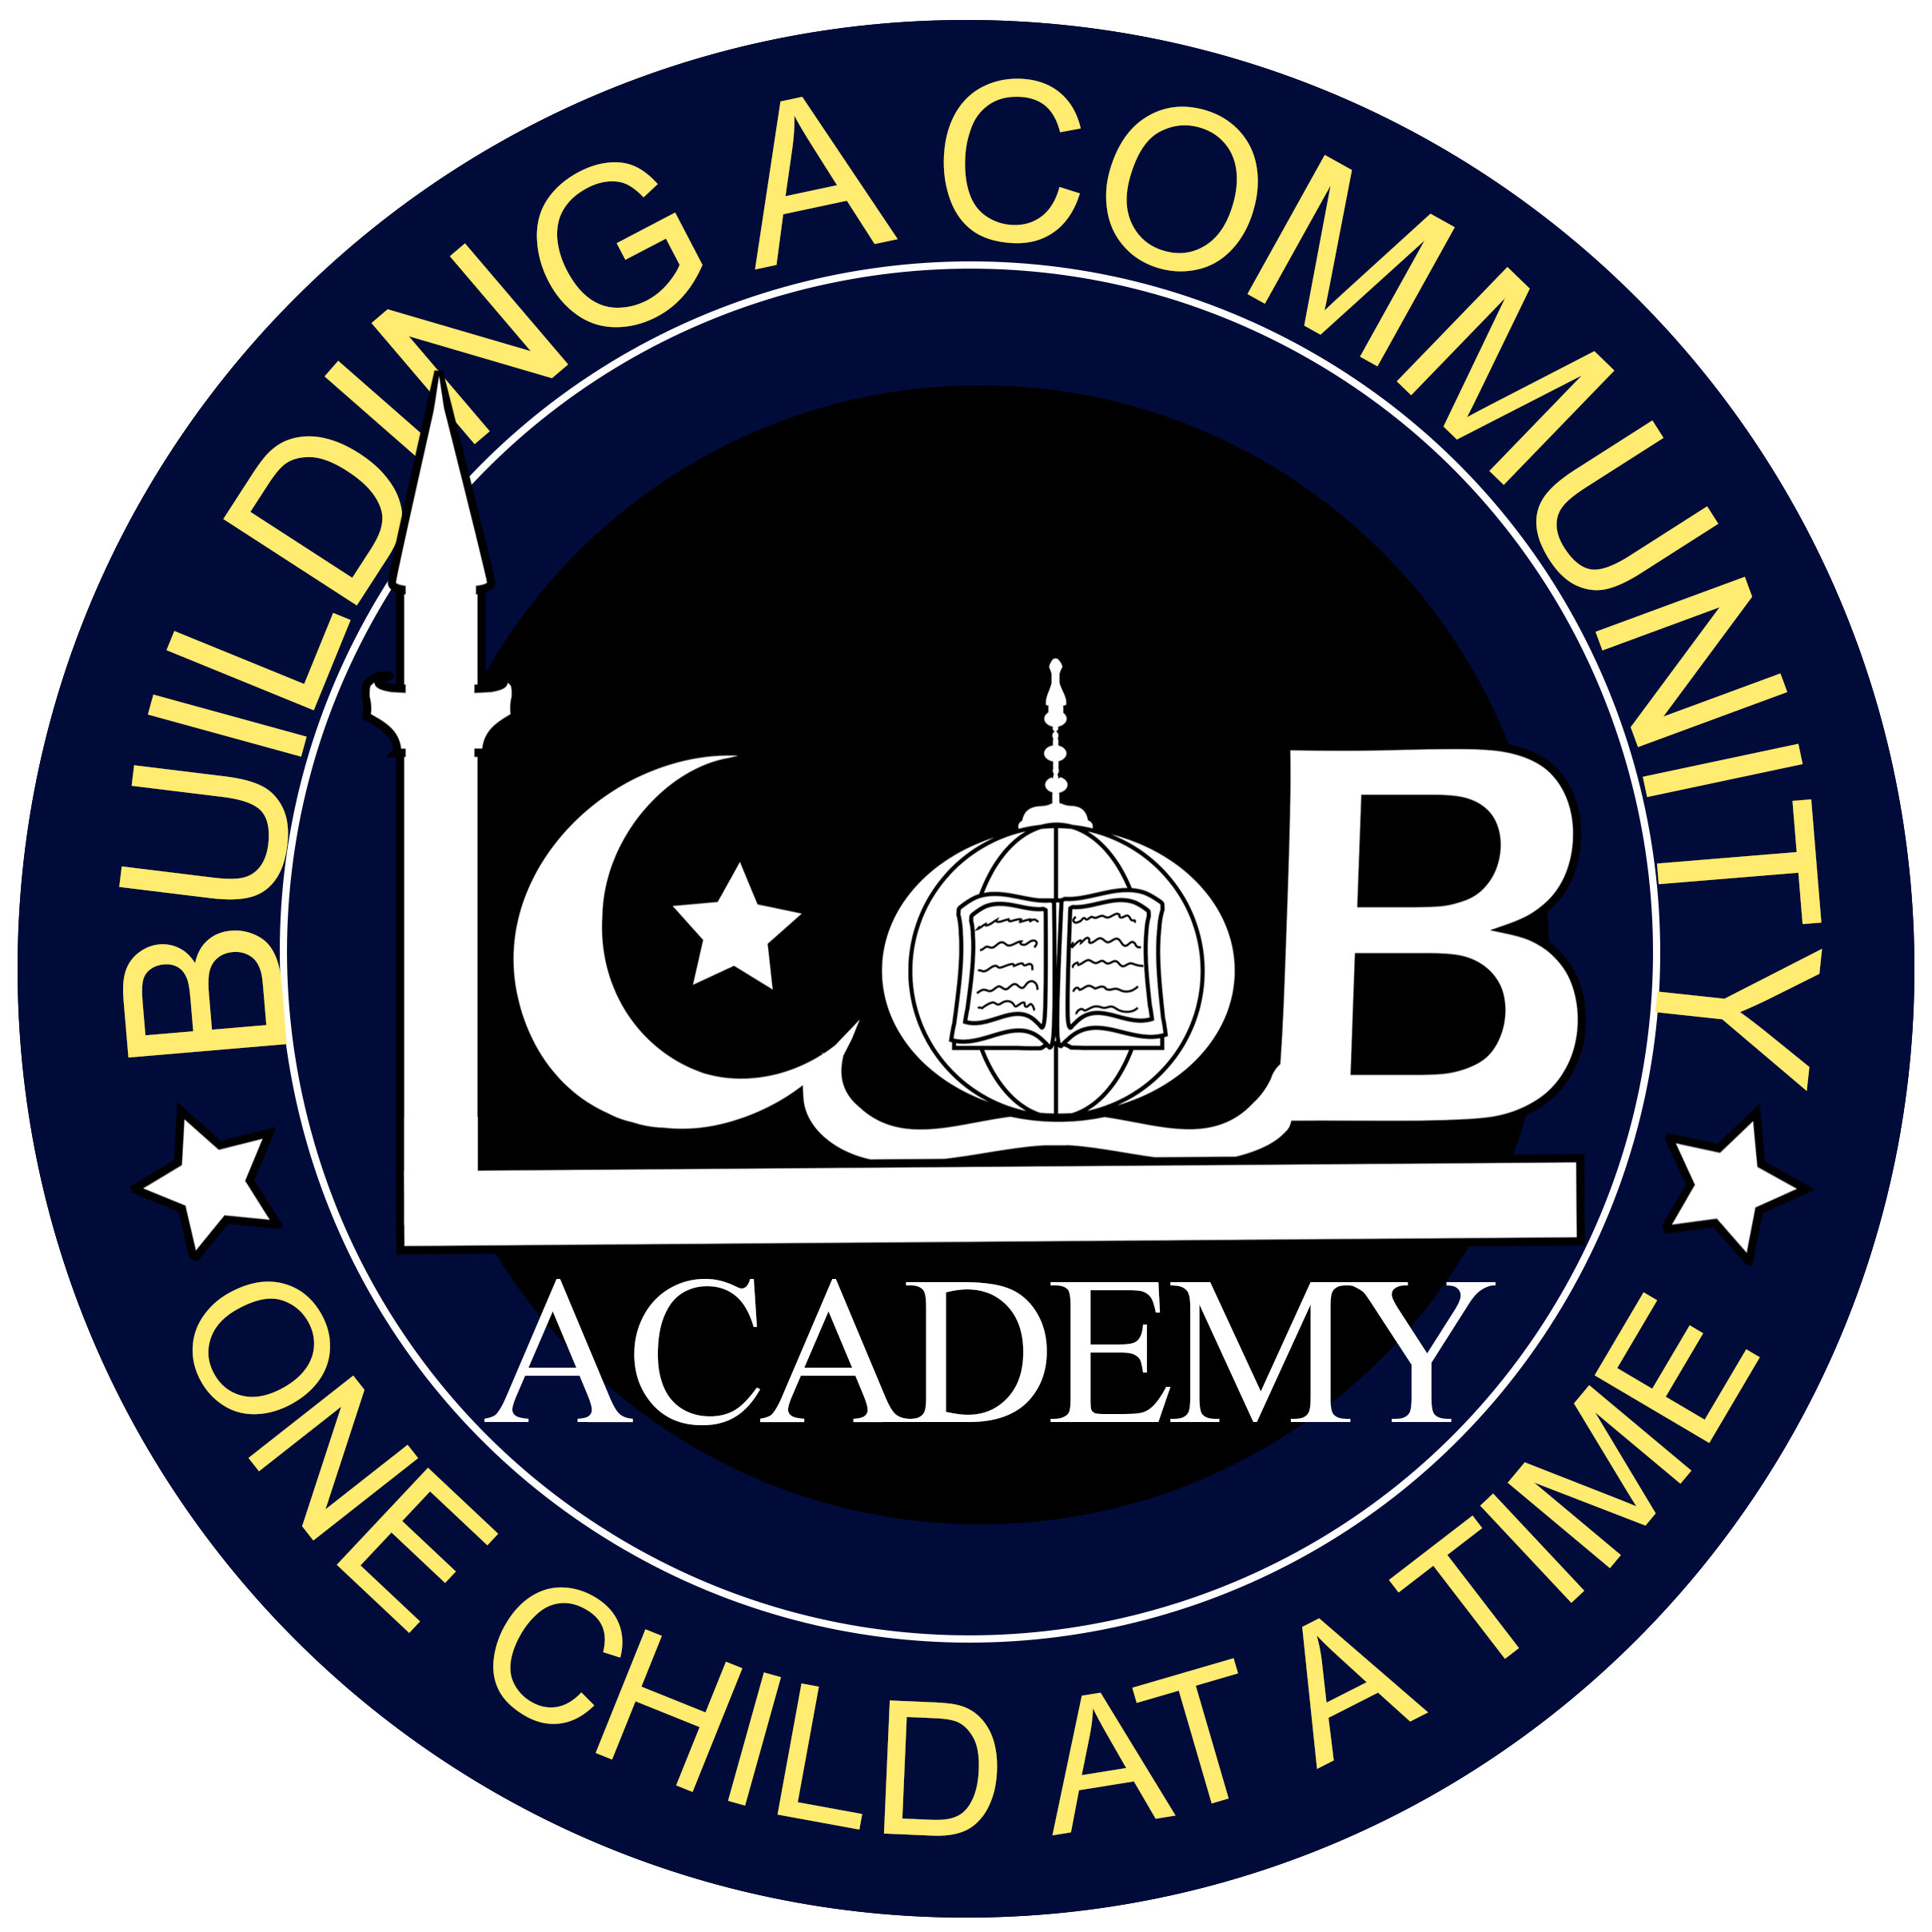 Iteration 3 of Modified logo to be used for the 2014-2015 school year on everything, including official stationary, school uniforms,  and promotional merchandise
Made in Photoshop